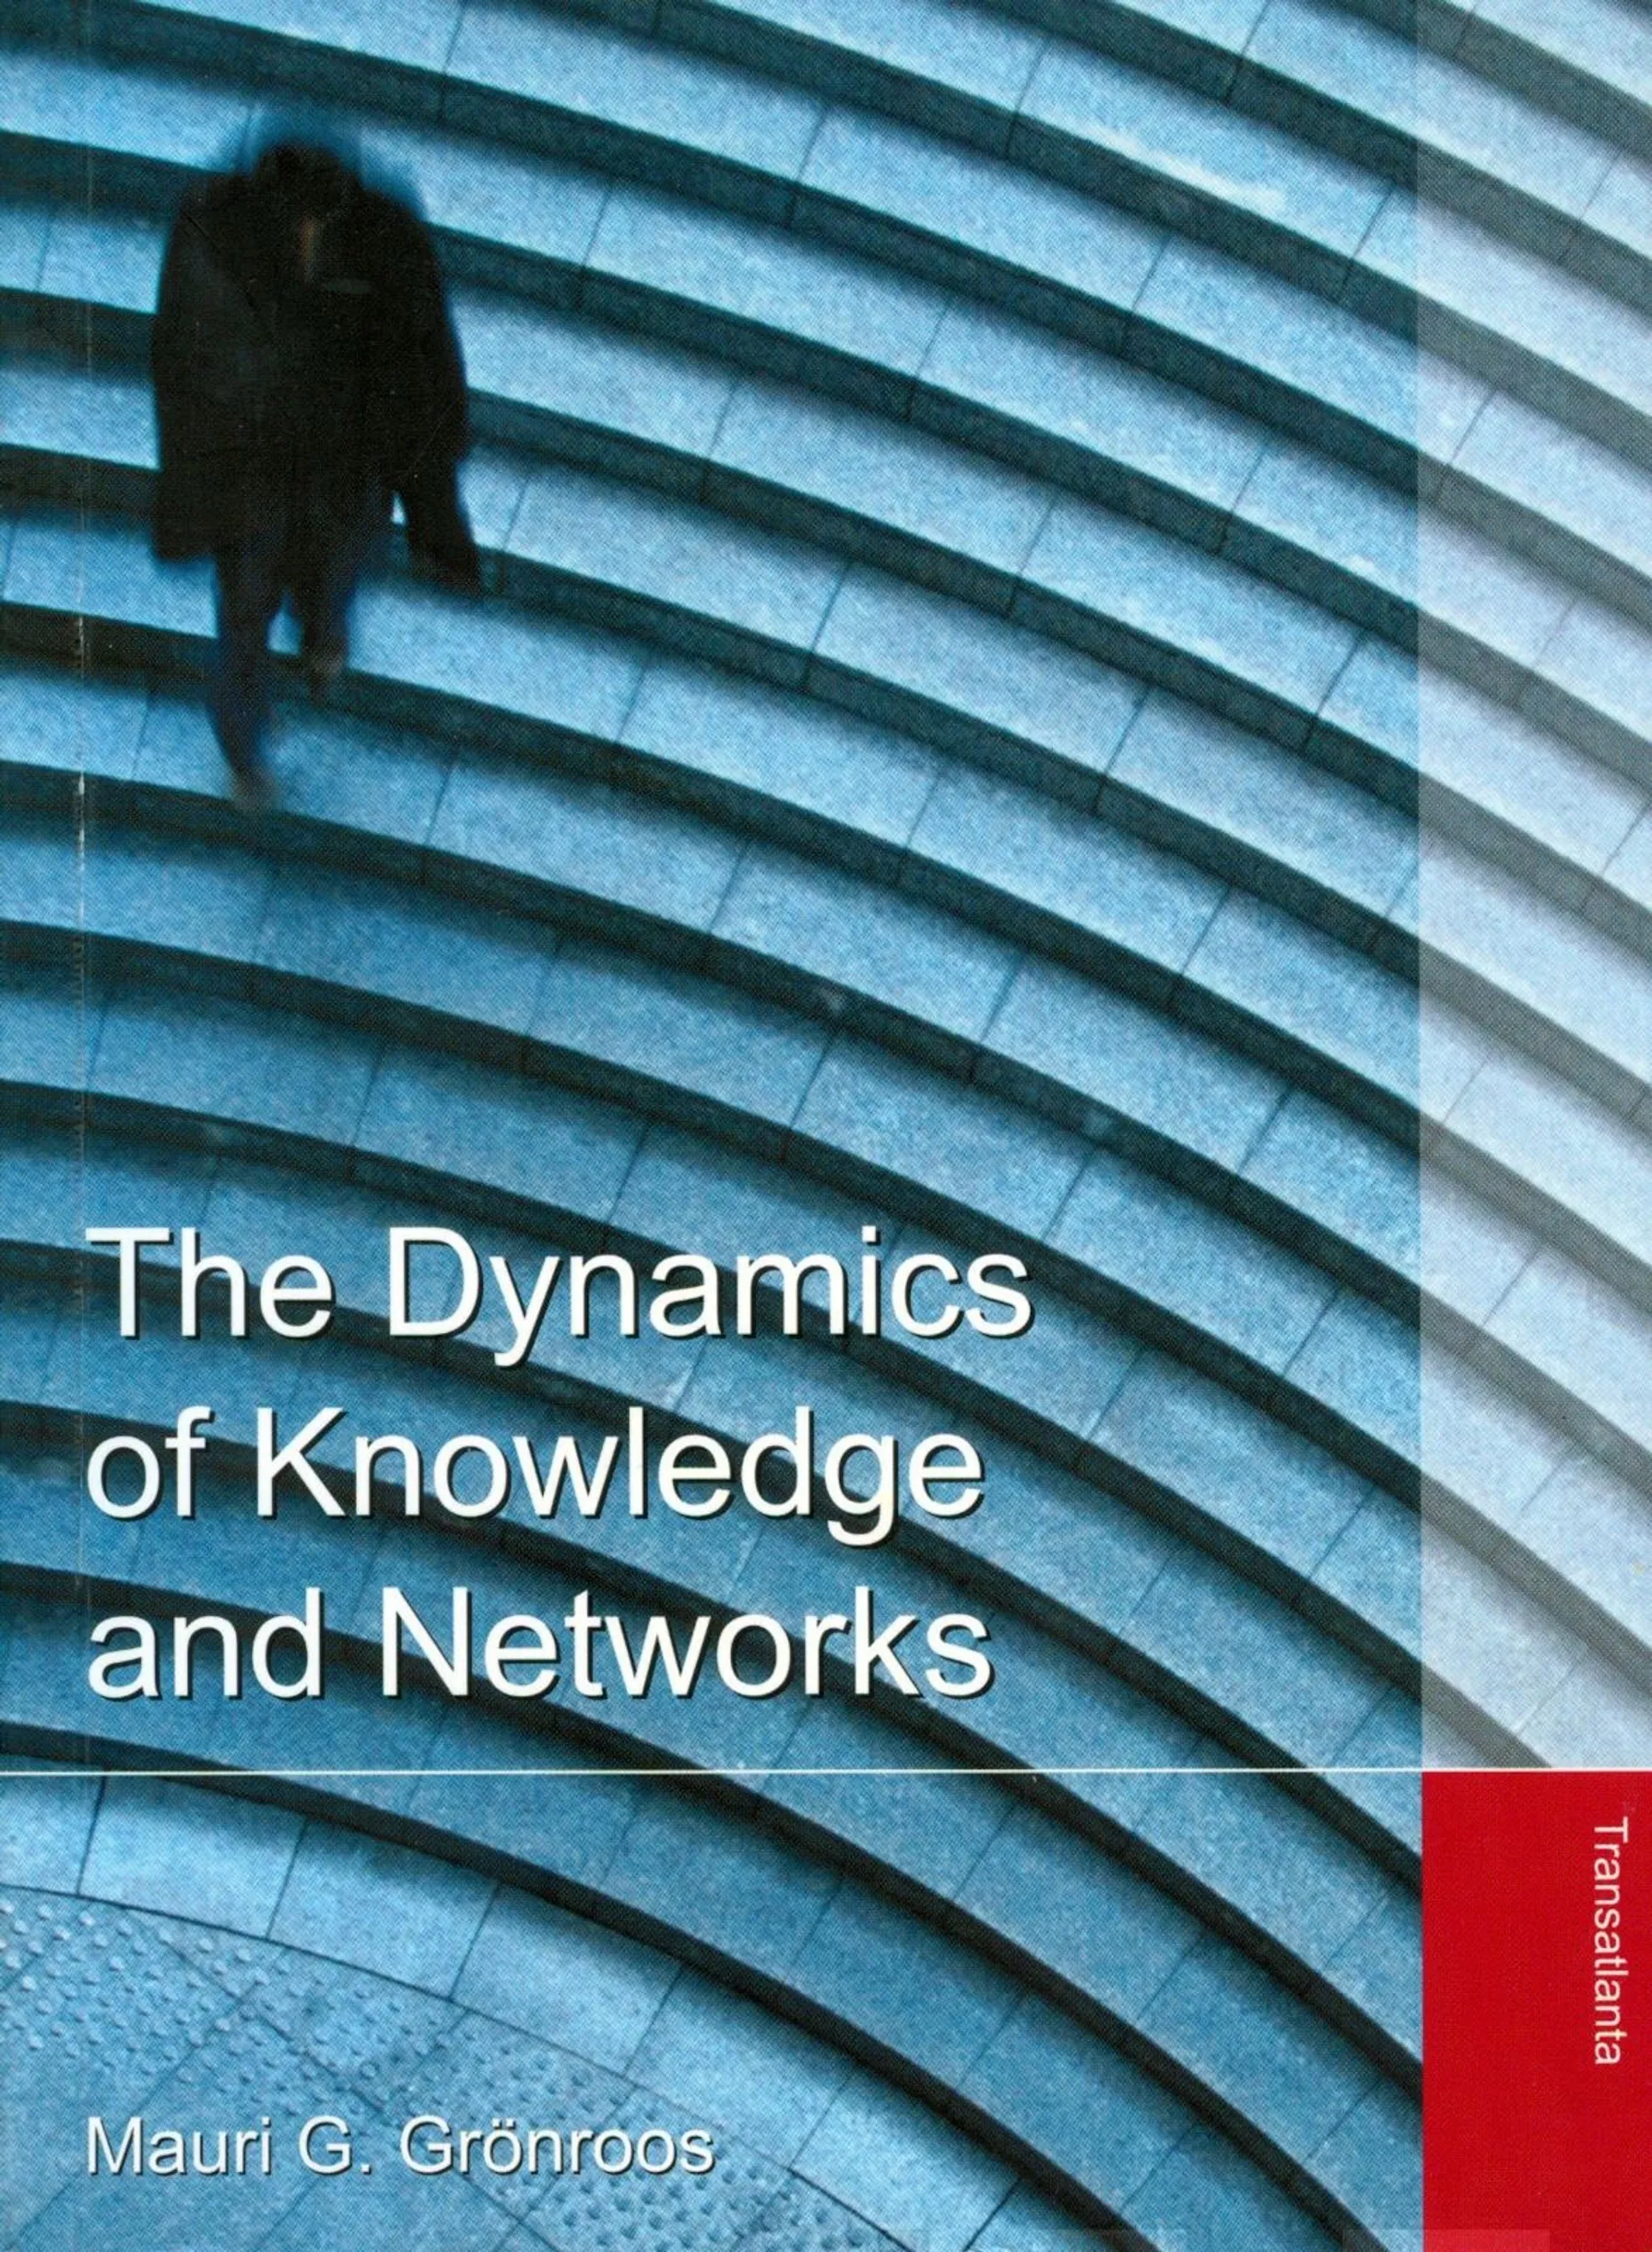 Grönroos, The Dynamics of Knowledge and Networks